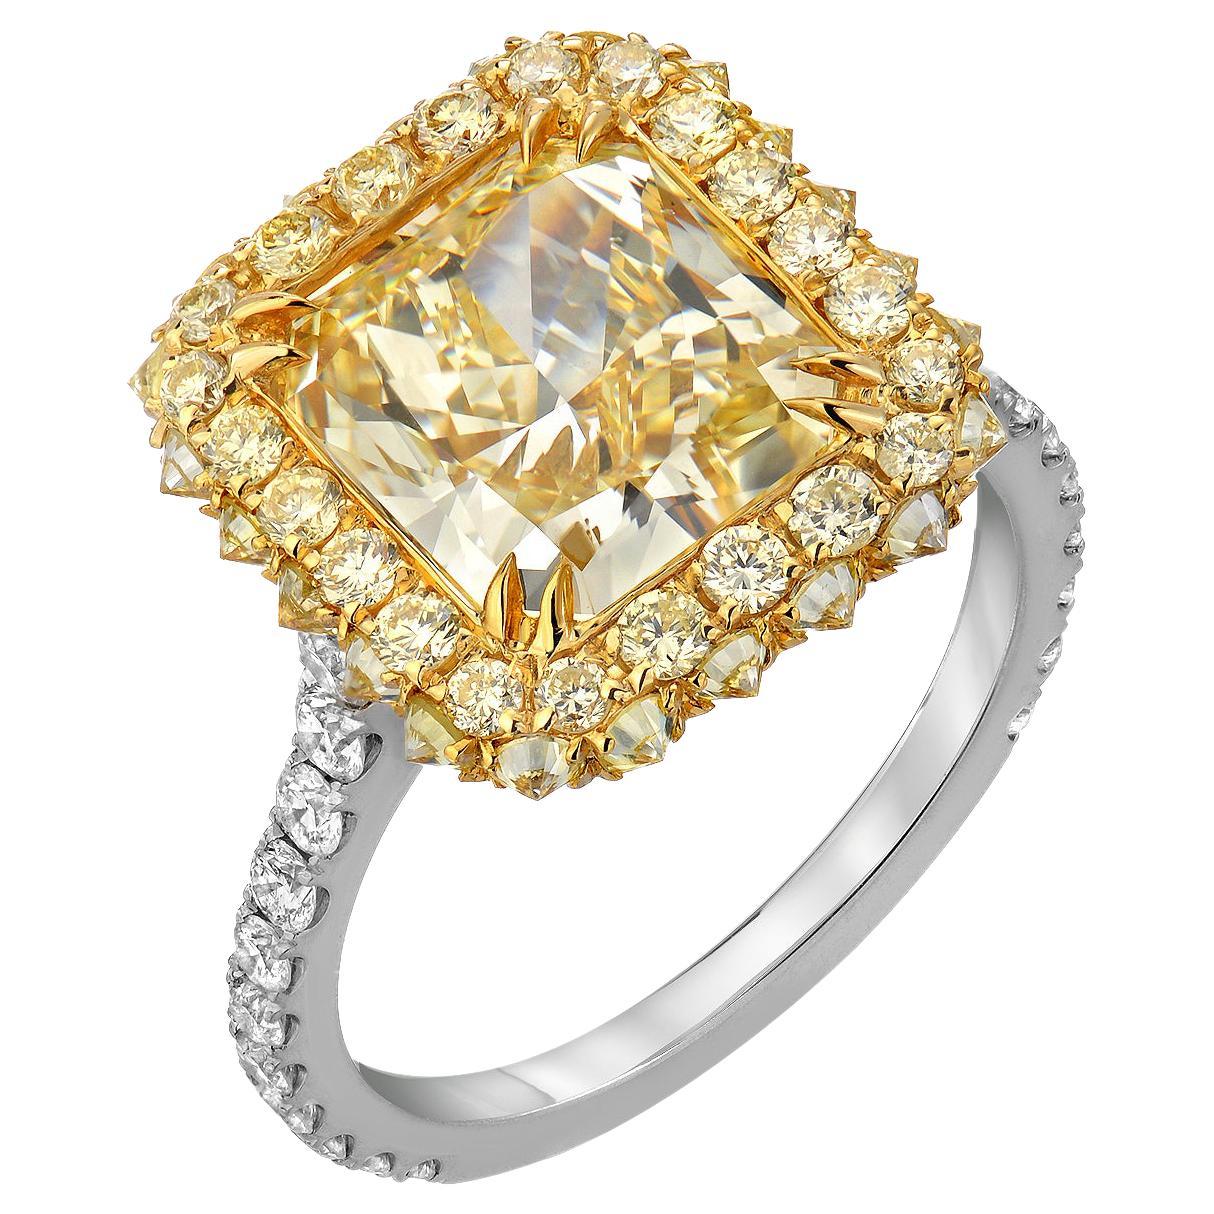 Fancy Light Yellow Diamond Ring 3.78 Carat Radiant Cut GIA Certified For Sale 6